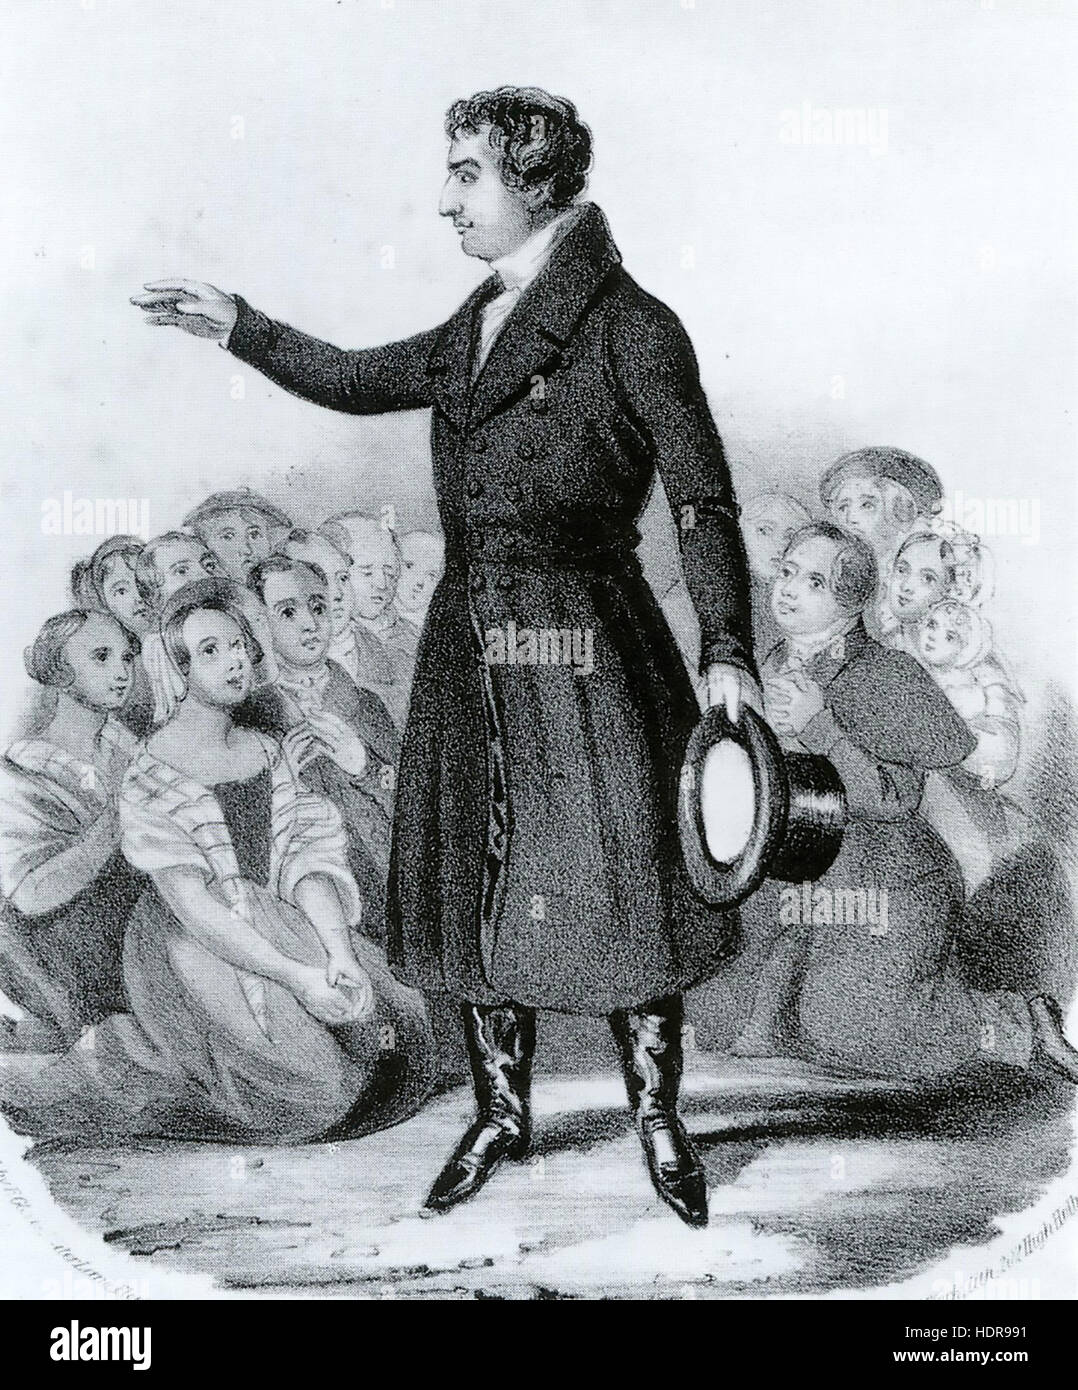 THEOBALD MATTHEW (1790-1856) Irish Catholic teetotalist reformer commonly known as Father Matthew urging people to take the pledge Stock Photo